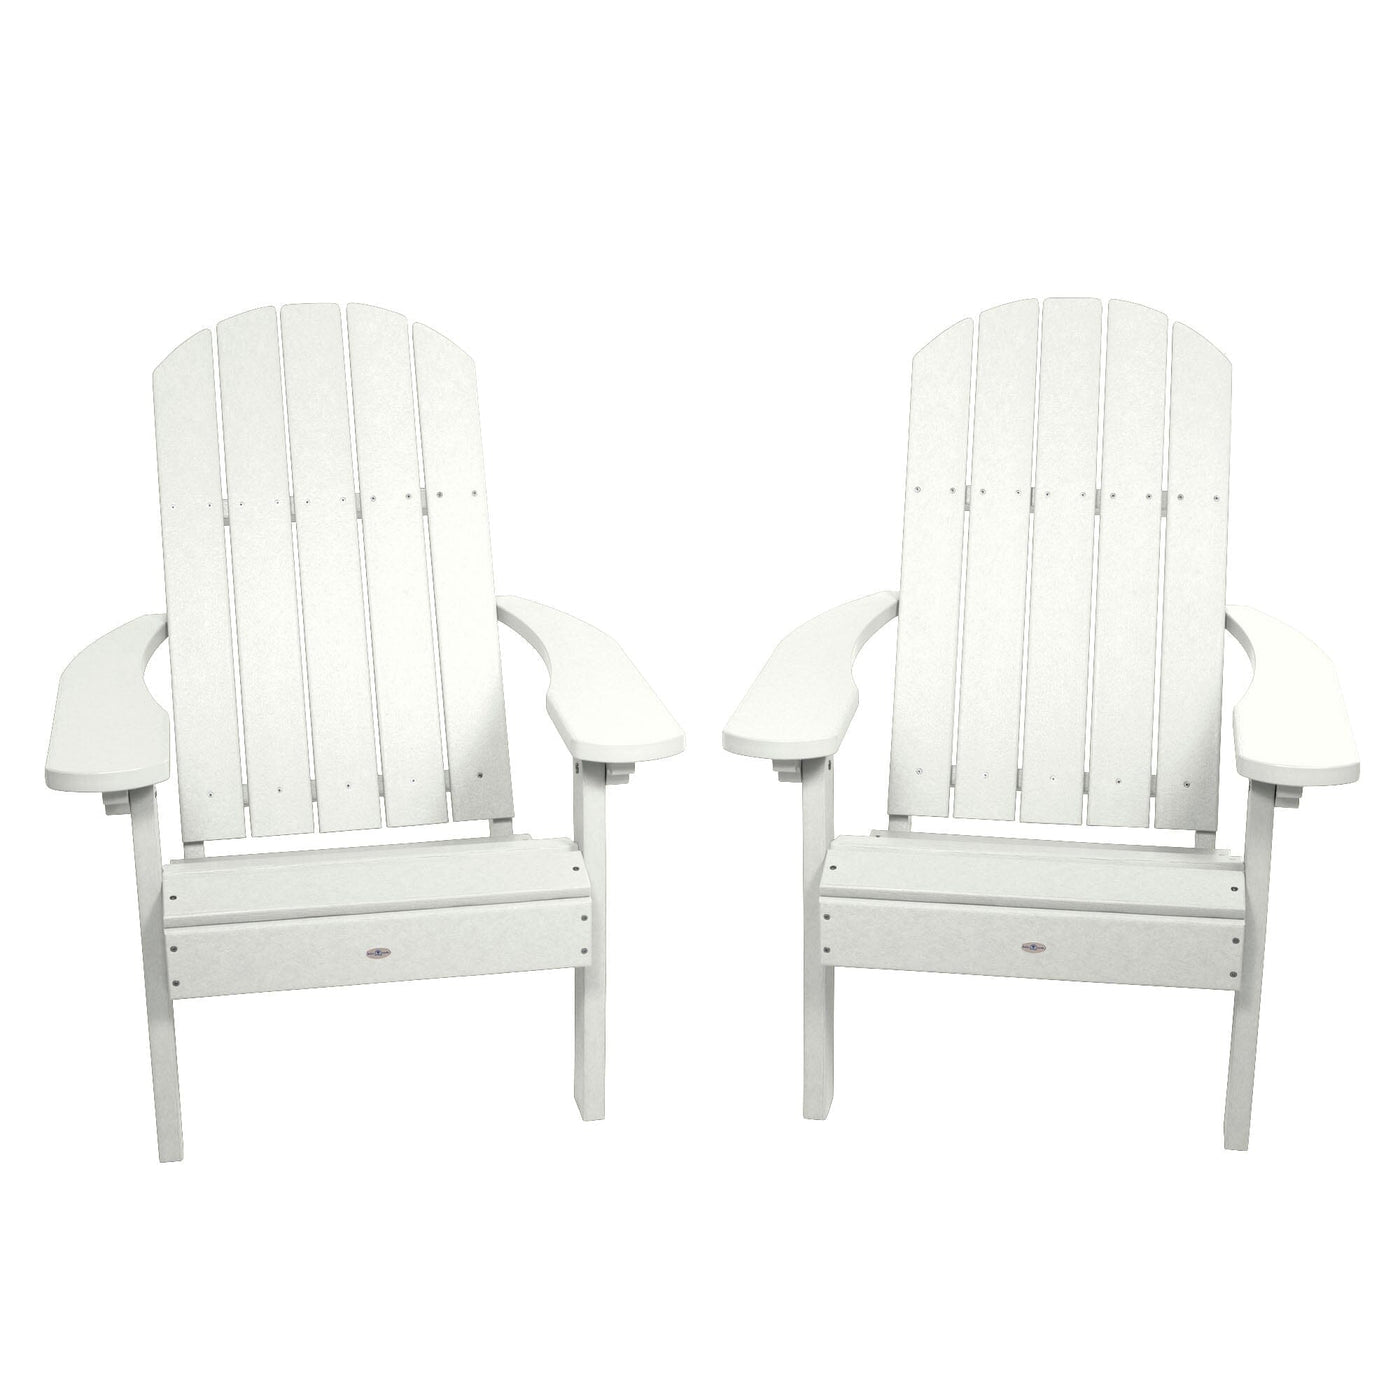 Cape Classic Adirondack Chair (Set of 2) Kitted Set Bahia Verde Outdoors Coconut White 